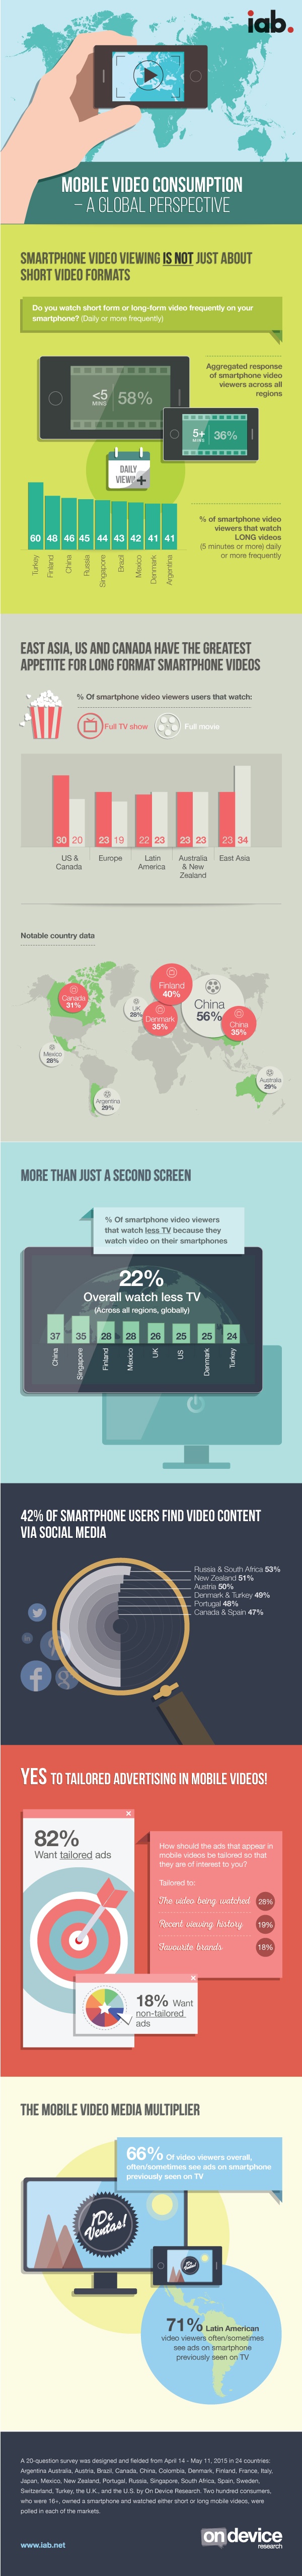 iab-research-mobile-video-usage-a-global-perspective